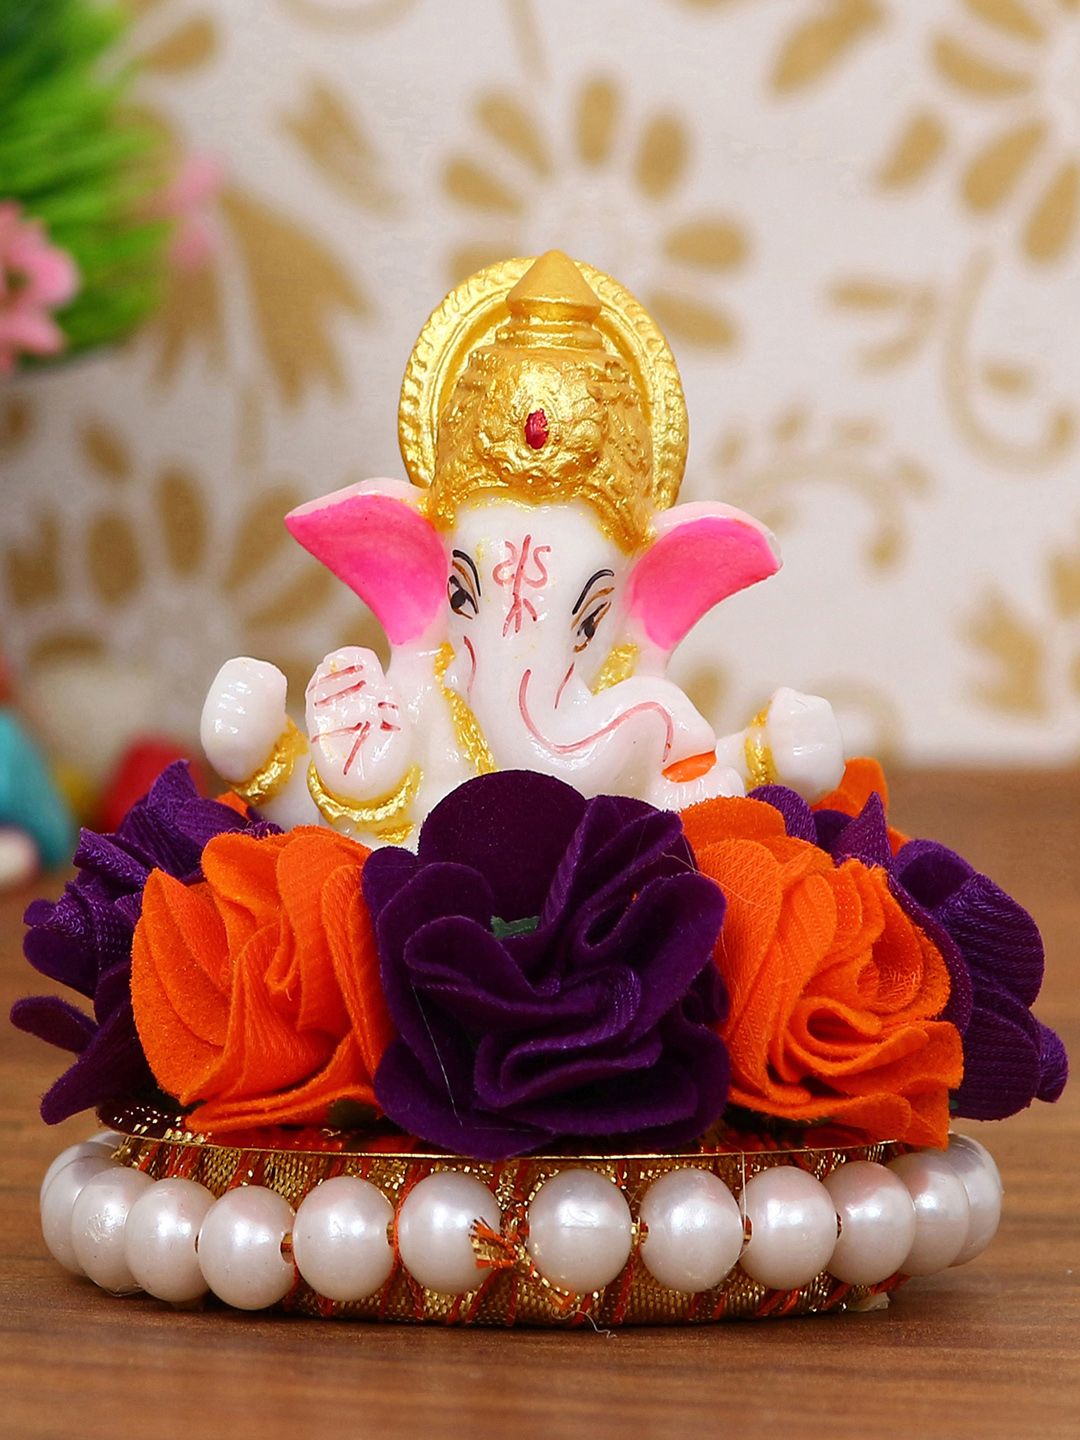 eCraftIndia Orange-Colored & White Handcrafted Lord Ganesha Idol On Decorative Plate With Flowers Showpiece Price in India